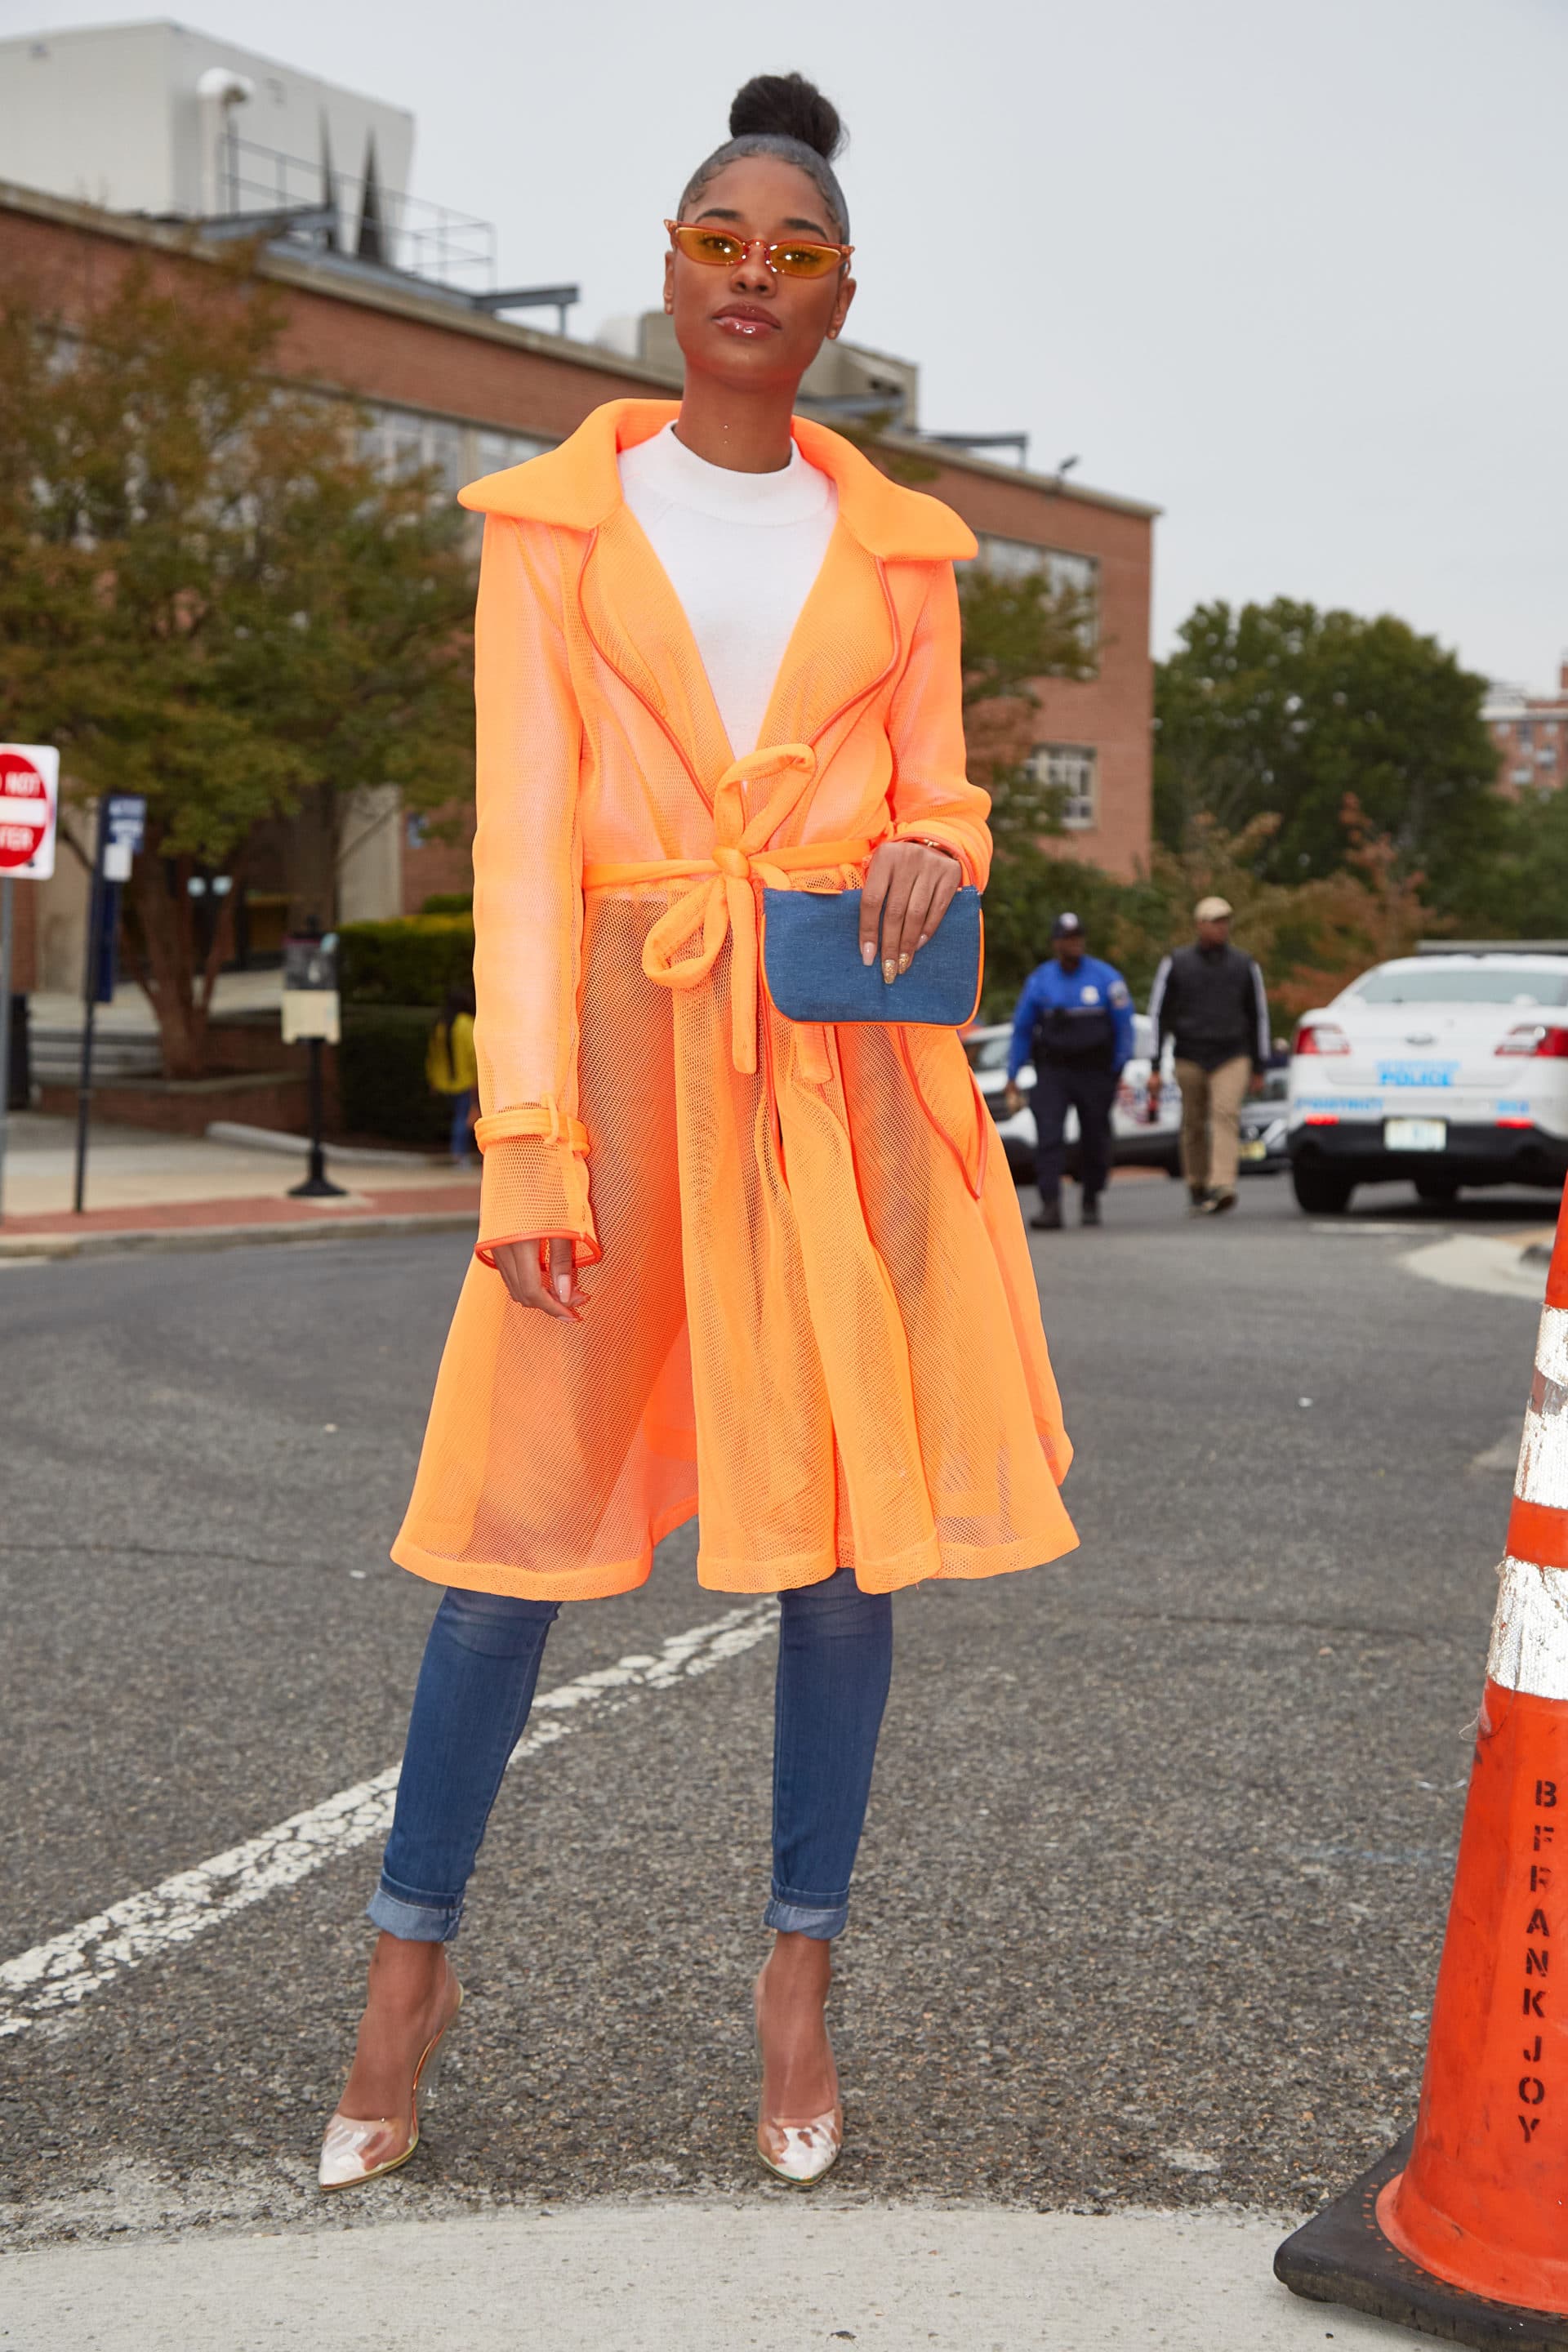 These Street Style Outfits Stormed The Yard At Howard’s Homecoming